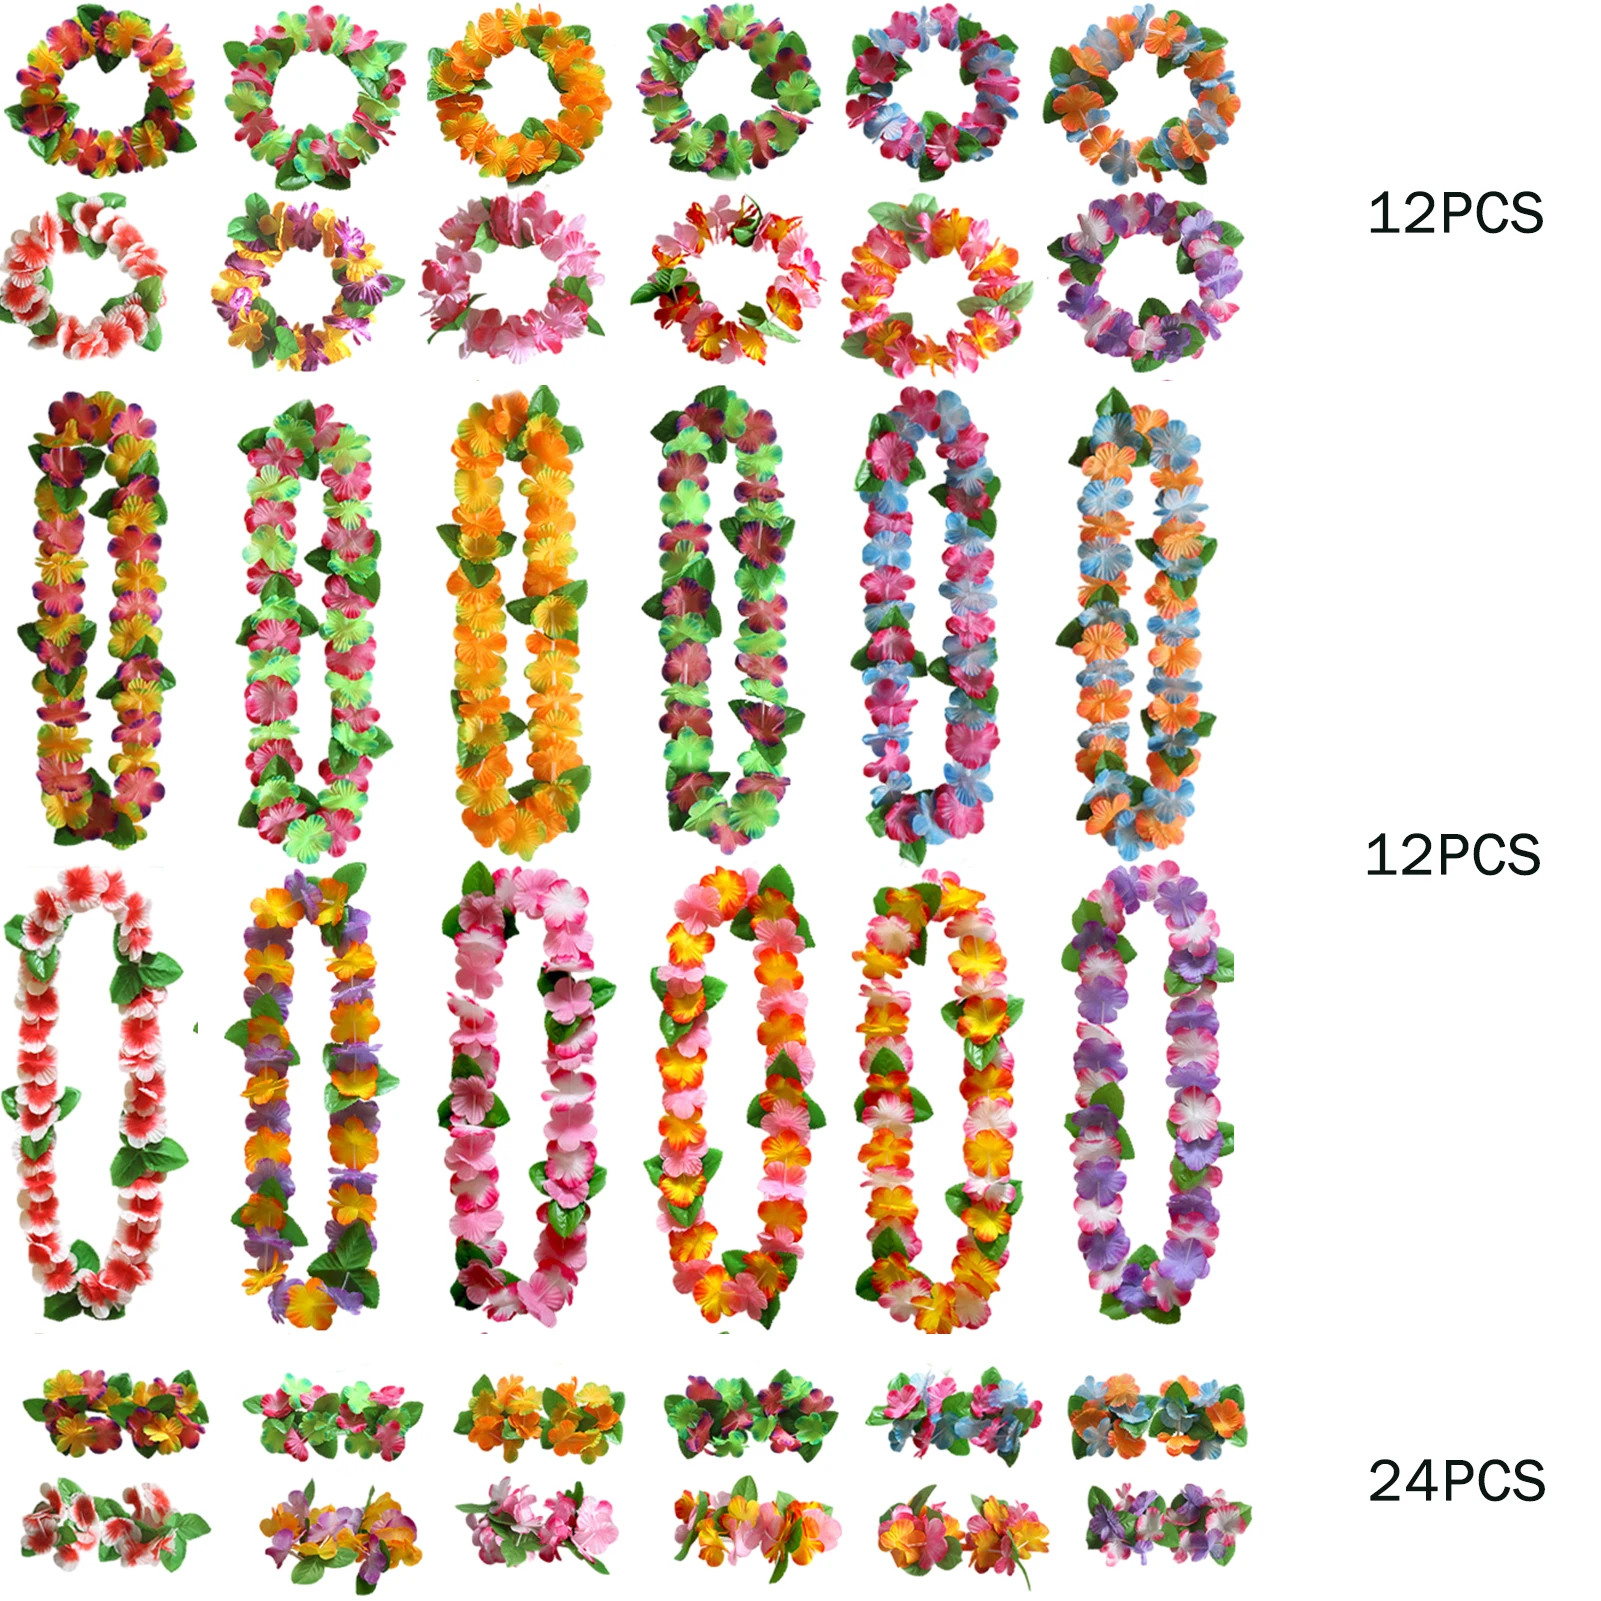 

48pcs Party Decorations Hawaiian Lei Headband Fancy Garland Necklace Colorful Artificial Holiday Cloth Chains Bracelets Beach